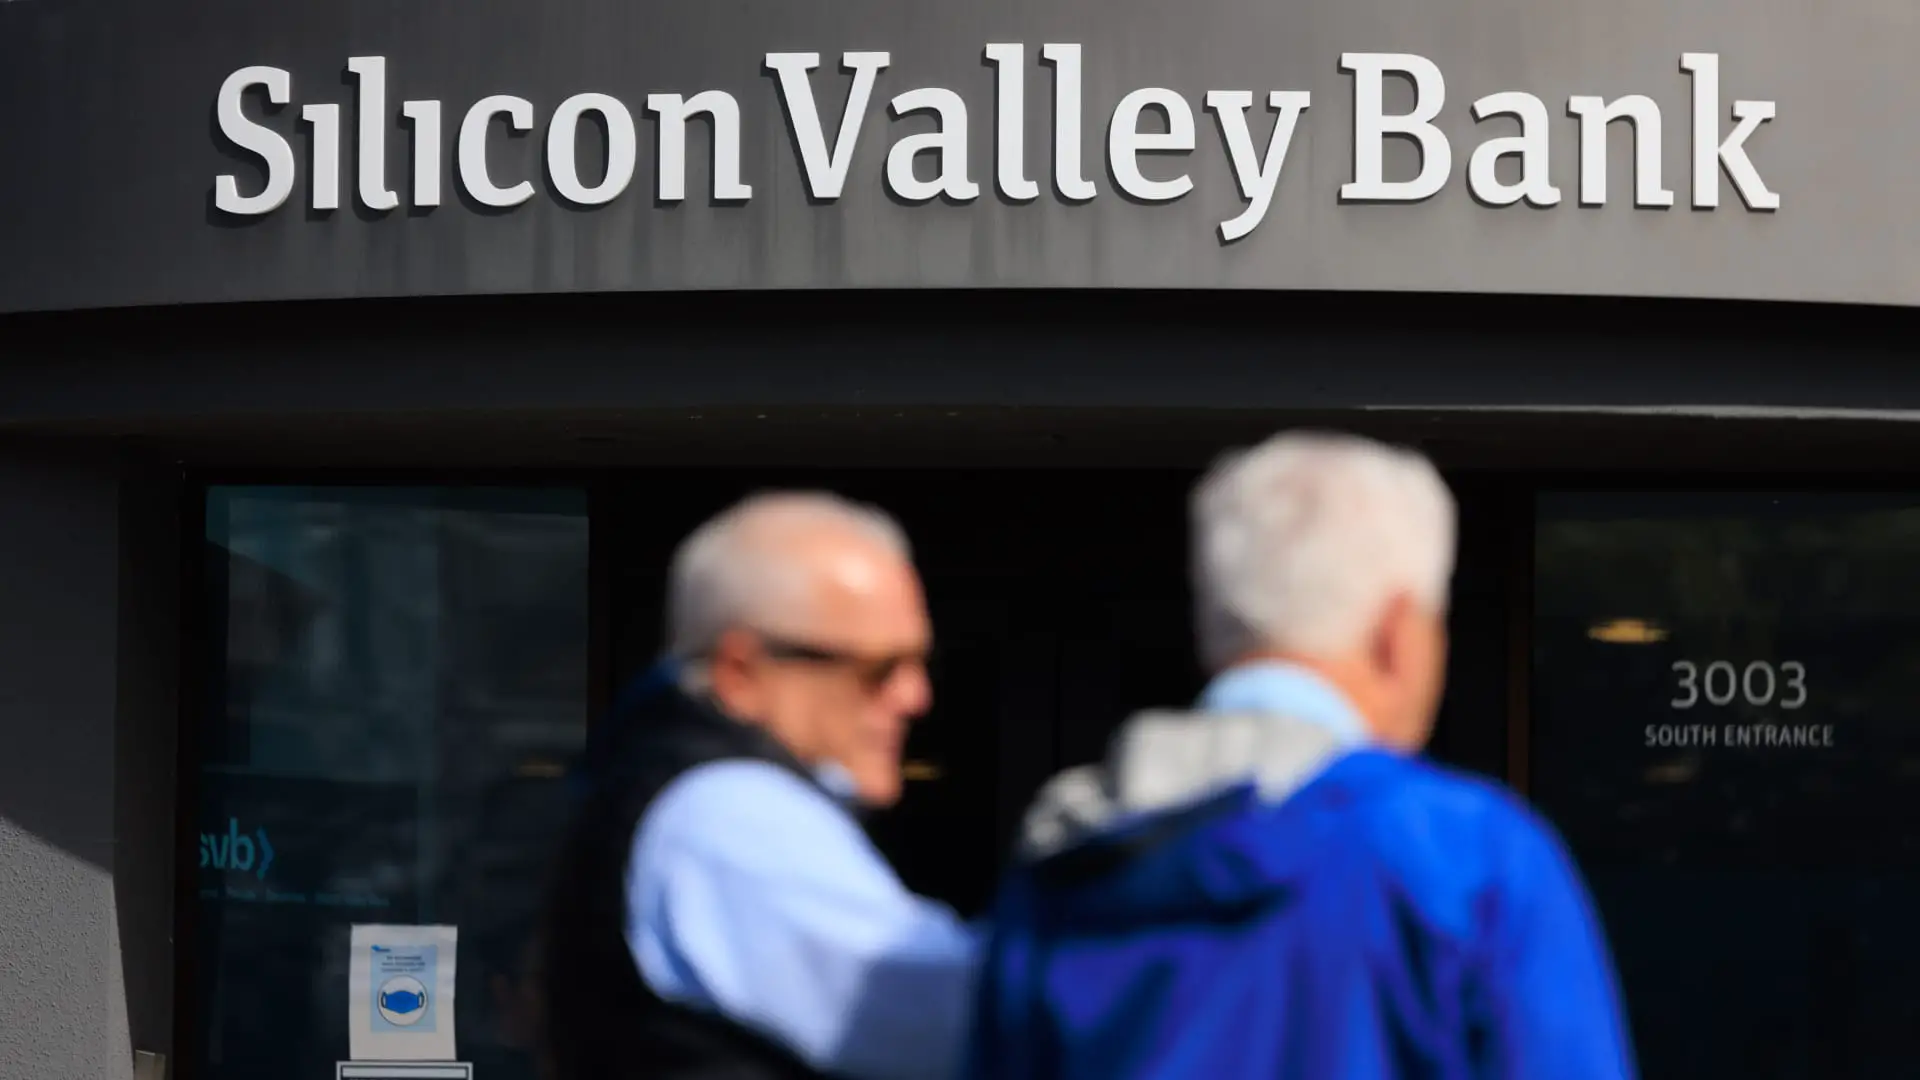 Here's a key lesson from Silicon Valley Bank and the banking crisis